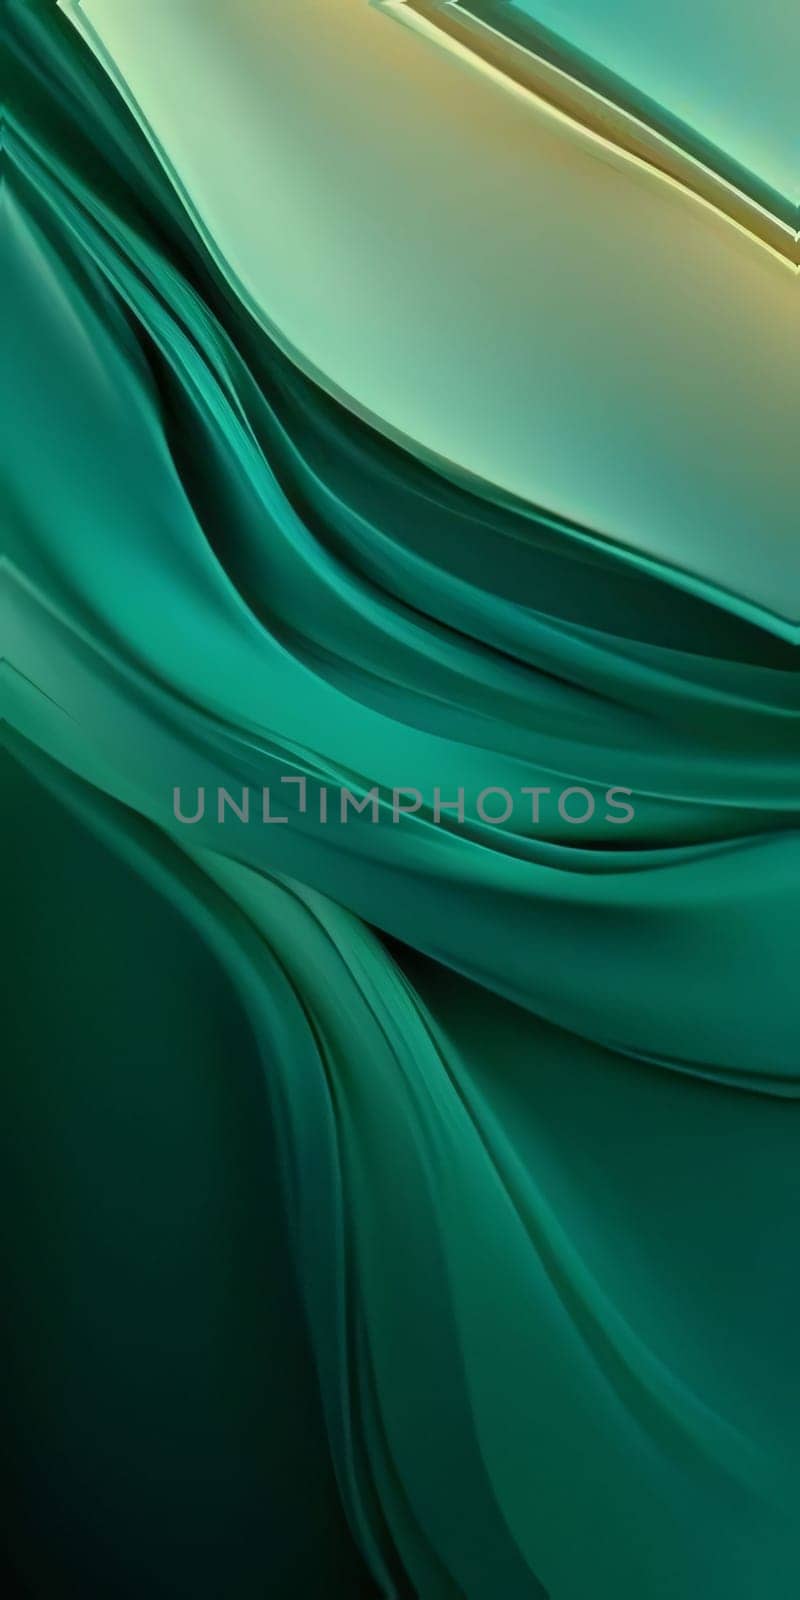 Abstract background design: abstract background with smooth lines in green and yellow colors, digitally generated image